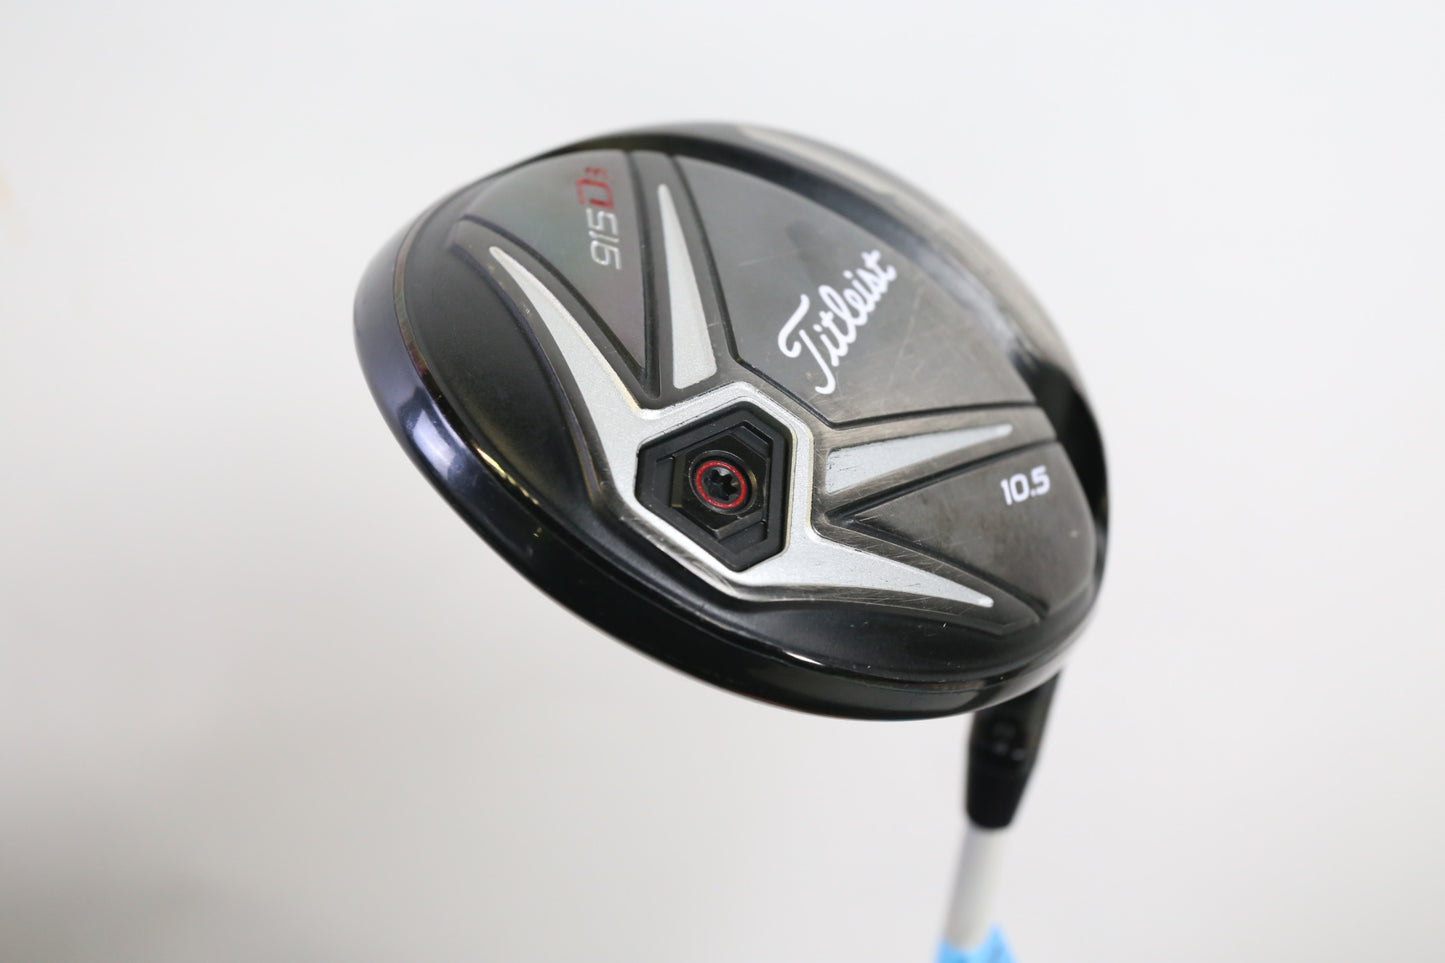 Used Titleist 915D3 Driver - Right-Handed - 10.5 Degrees - Stiff Flex